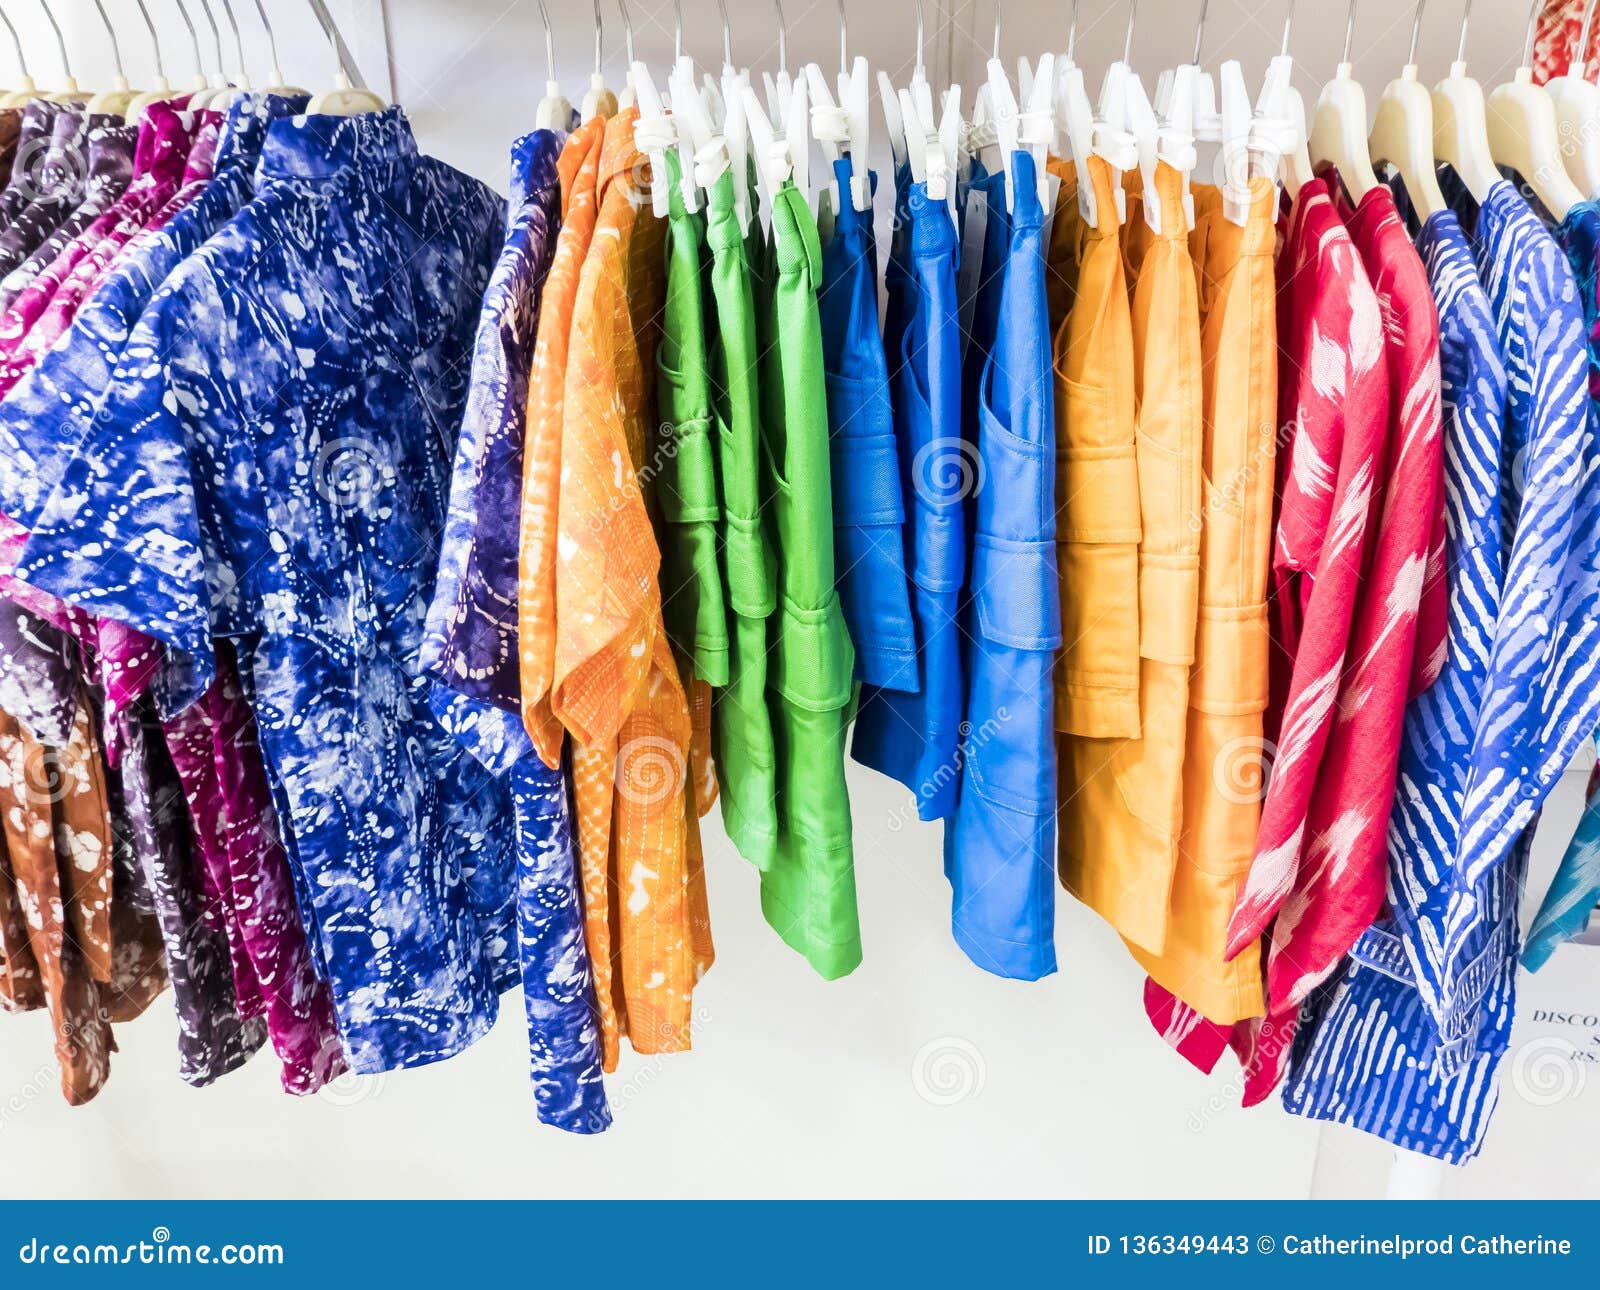 Fashionable Clothes in a Boutique Store Stock Image - Image of colorful ...